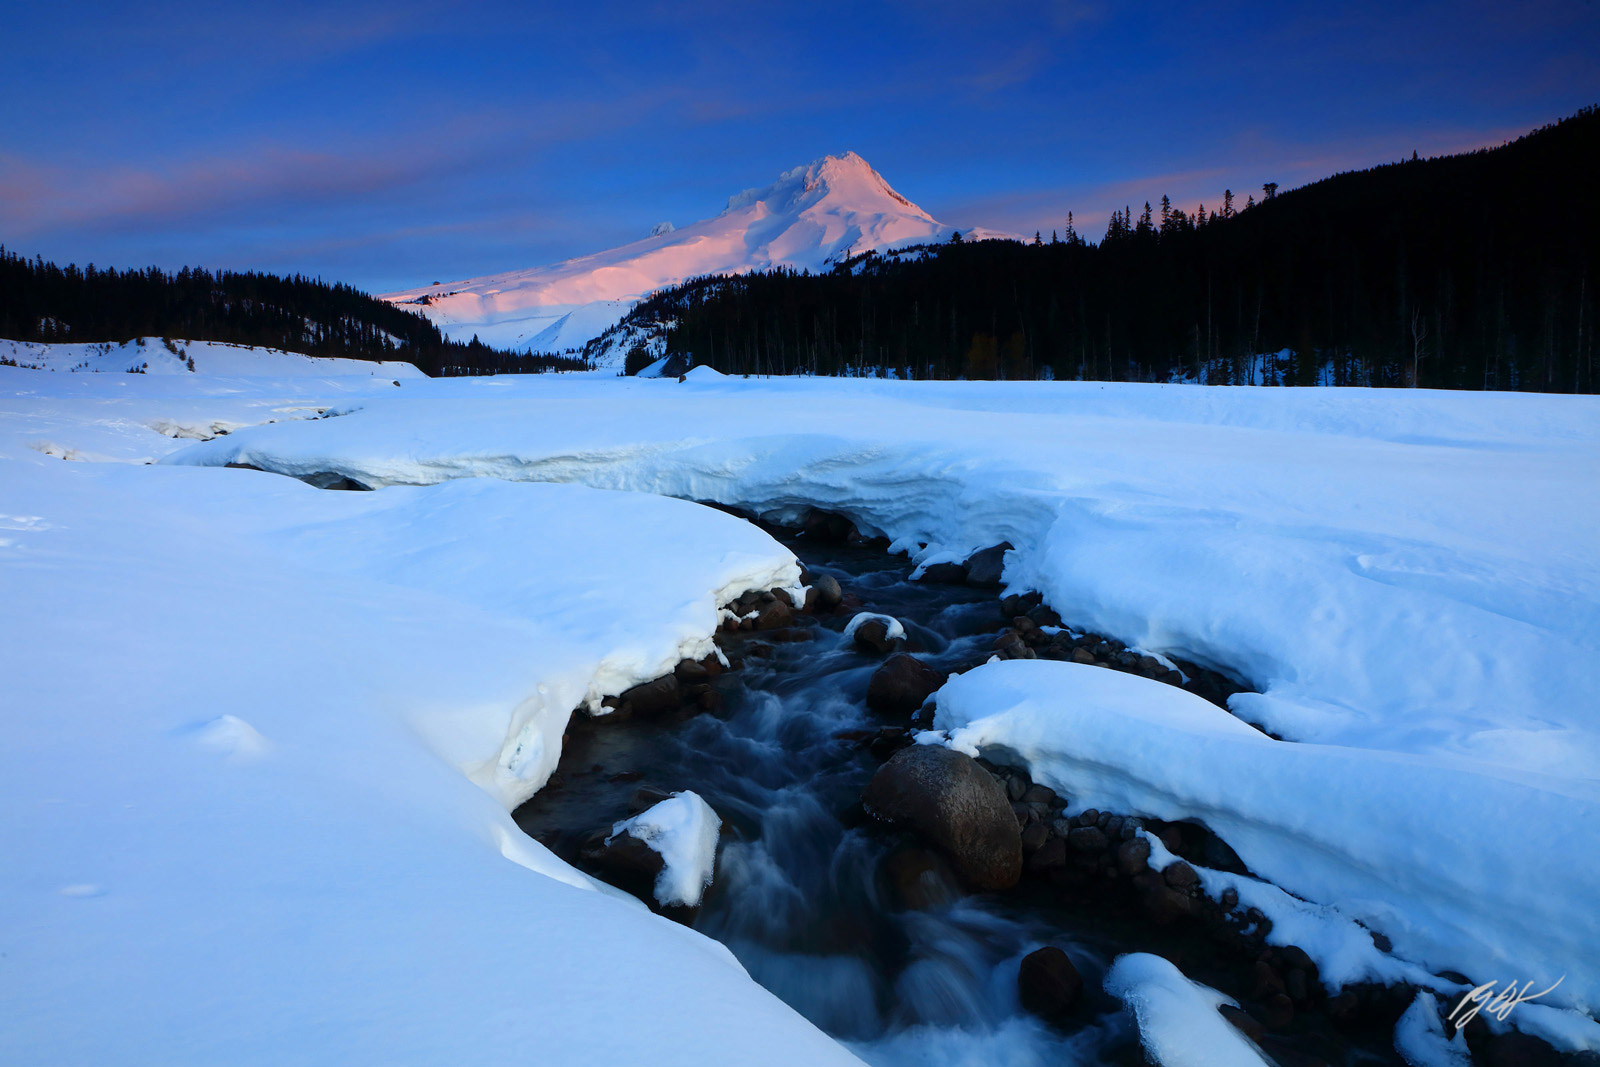 Sunrise Light on Mt Hood with the White River in the Mt Hood Wilderness in Oregon